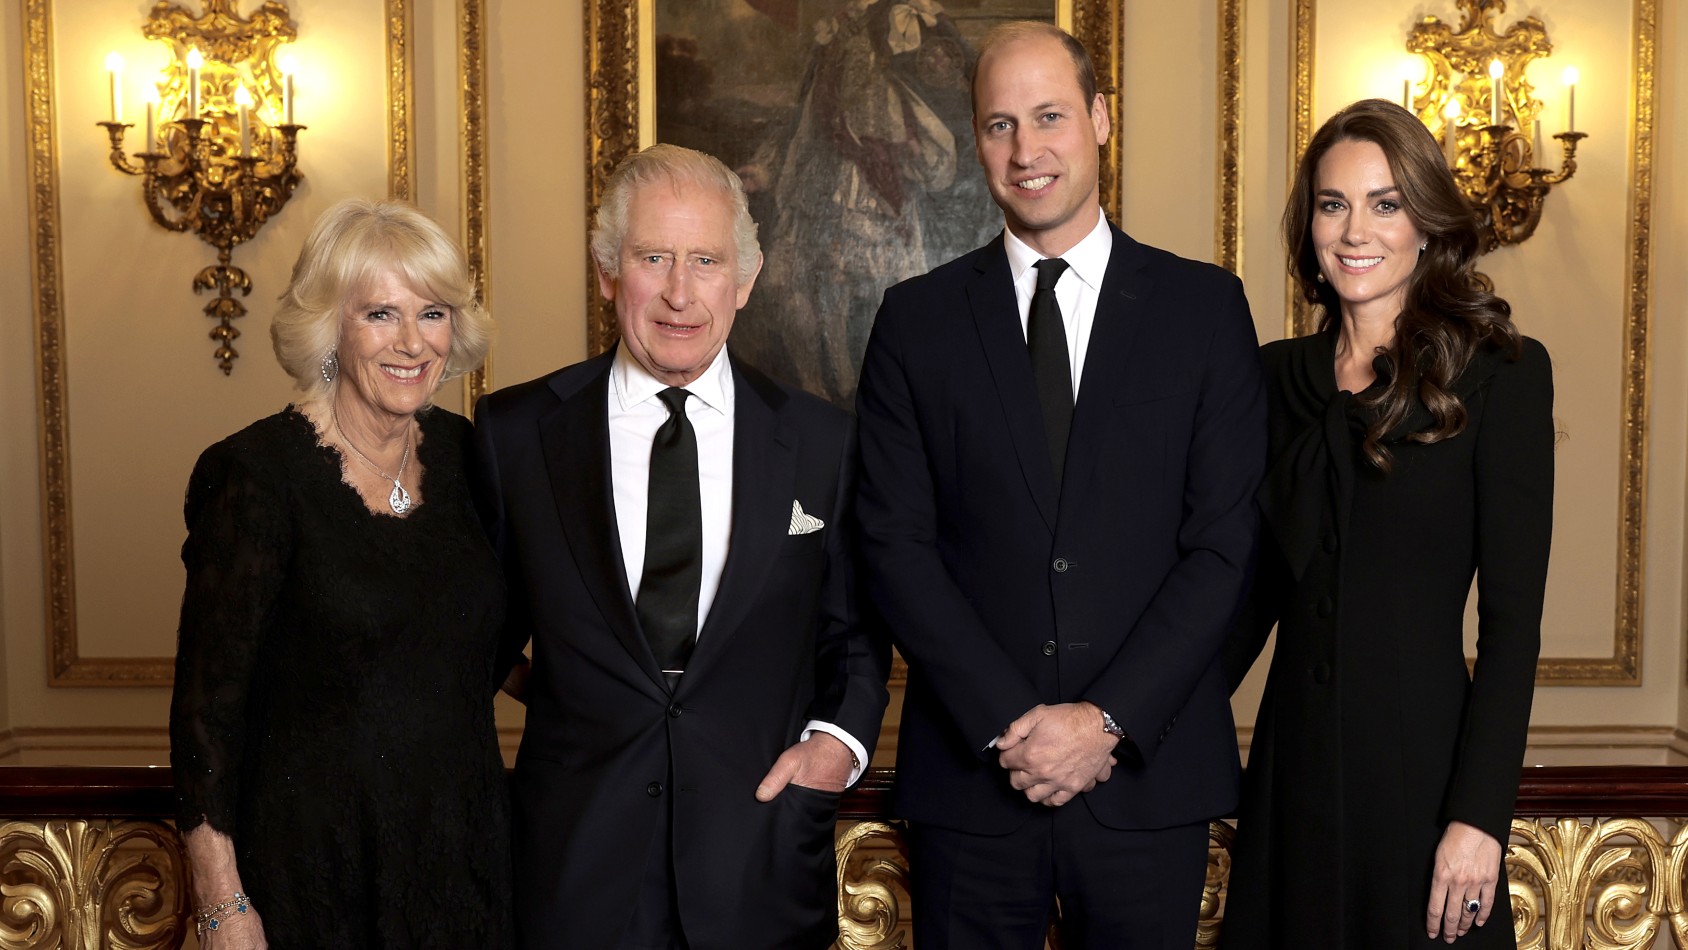 Prince William "Made It Clear" to Camilla That "She's Not Step-Grandma to His Children," Royal Biographer Claims